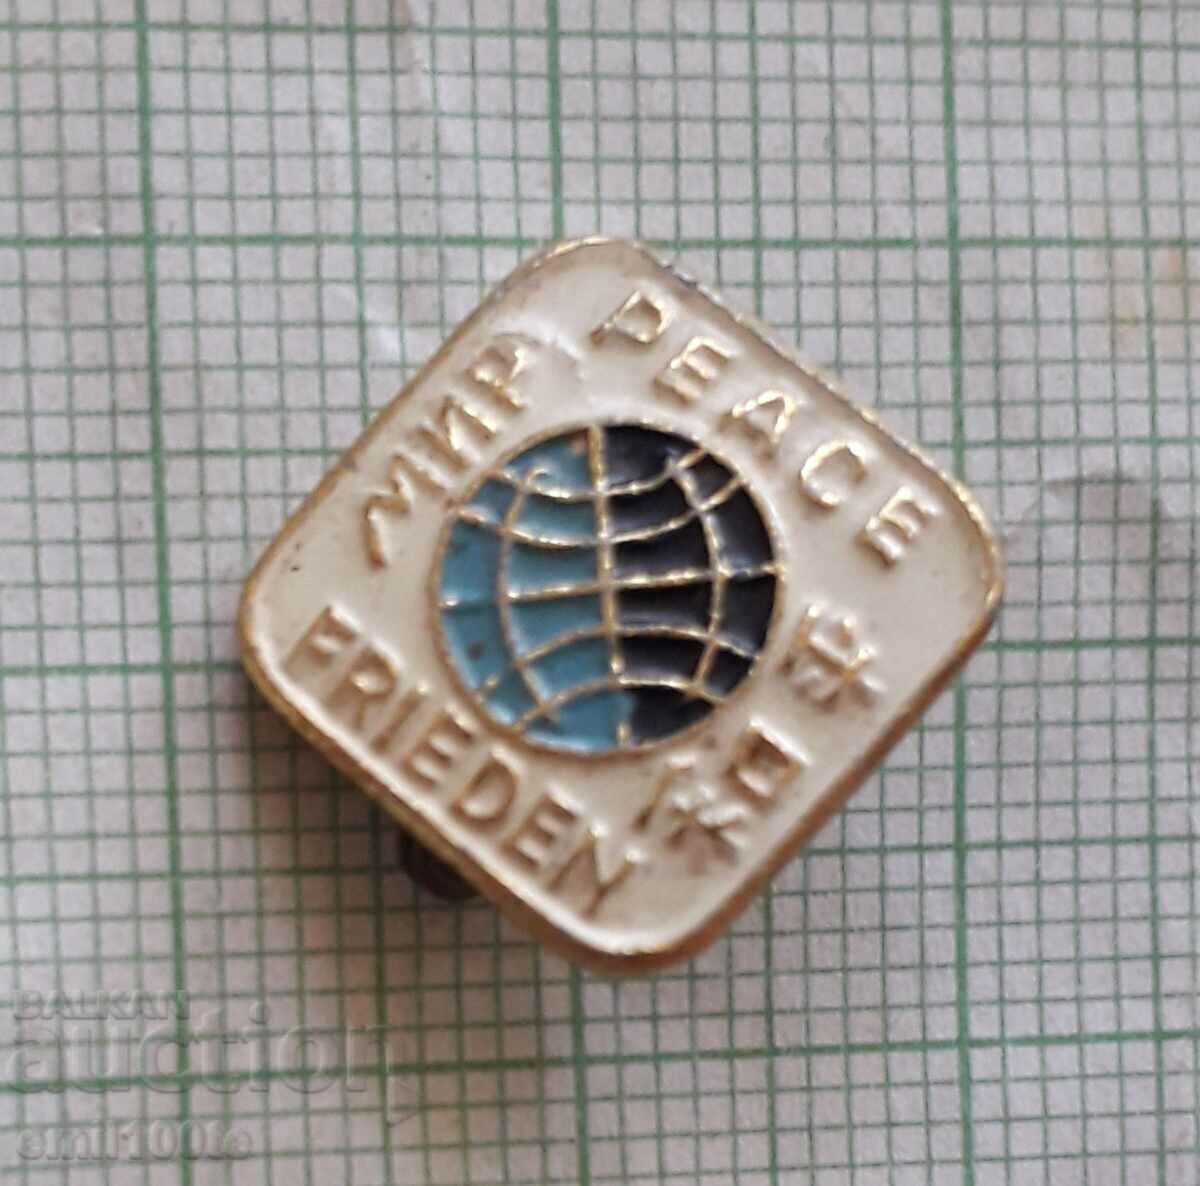 Badge - Peace of the USSR